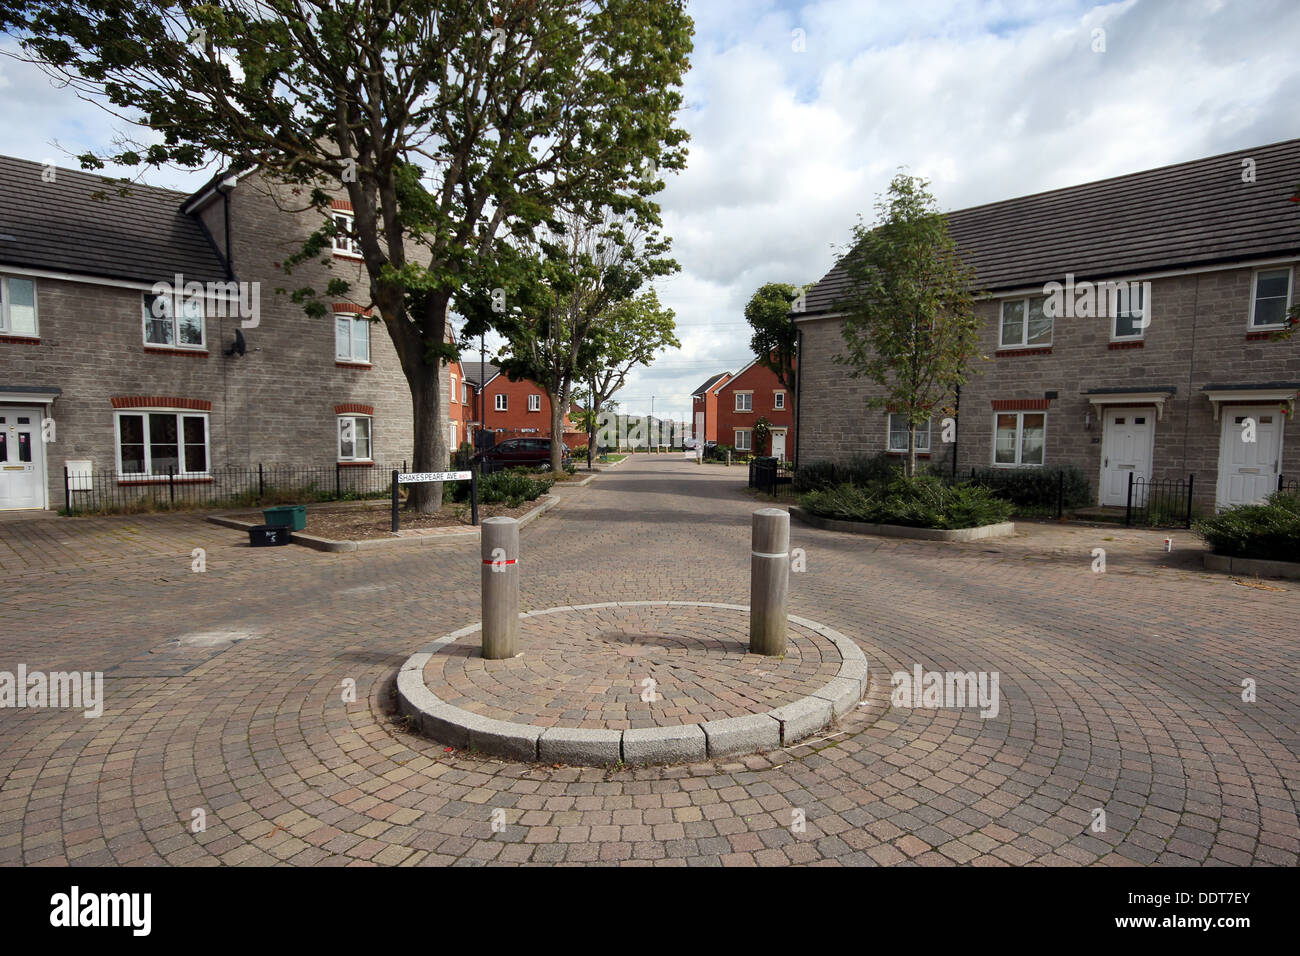 A mini roundabout on a cobbled street in a new housing estate, Bristol, UK. Stock Photo